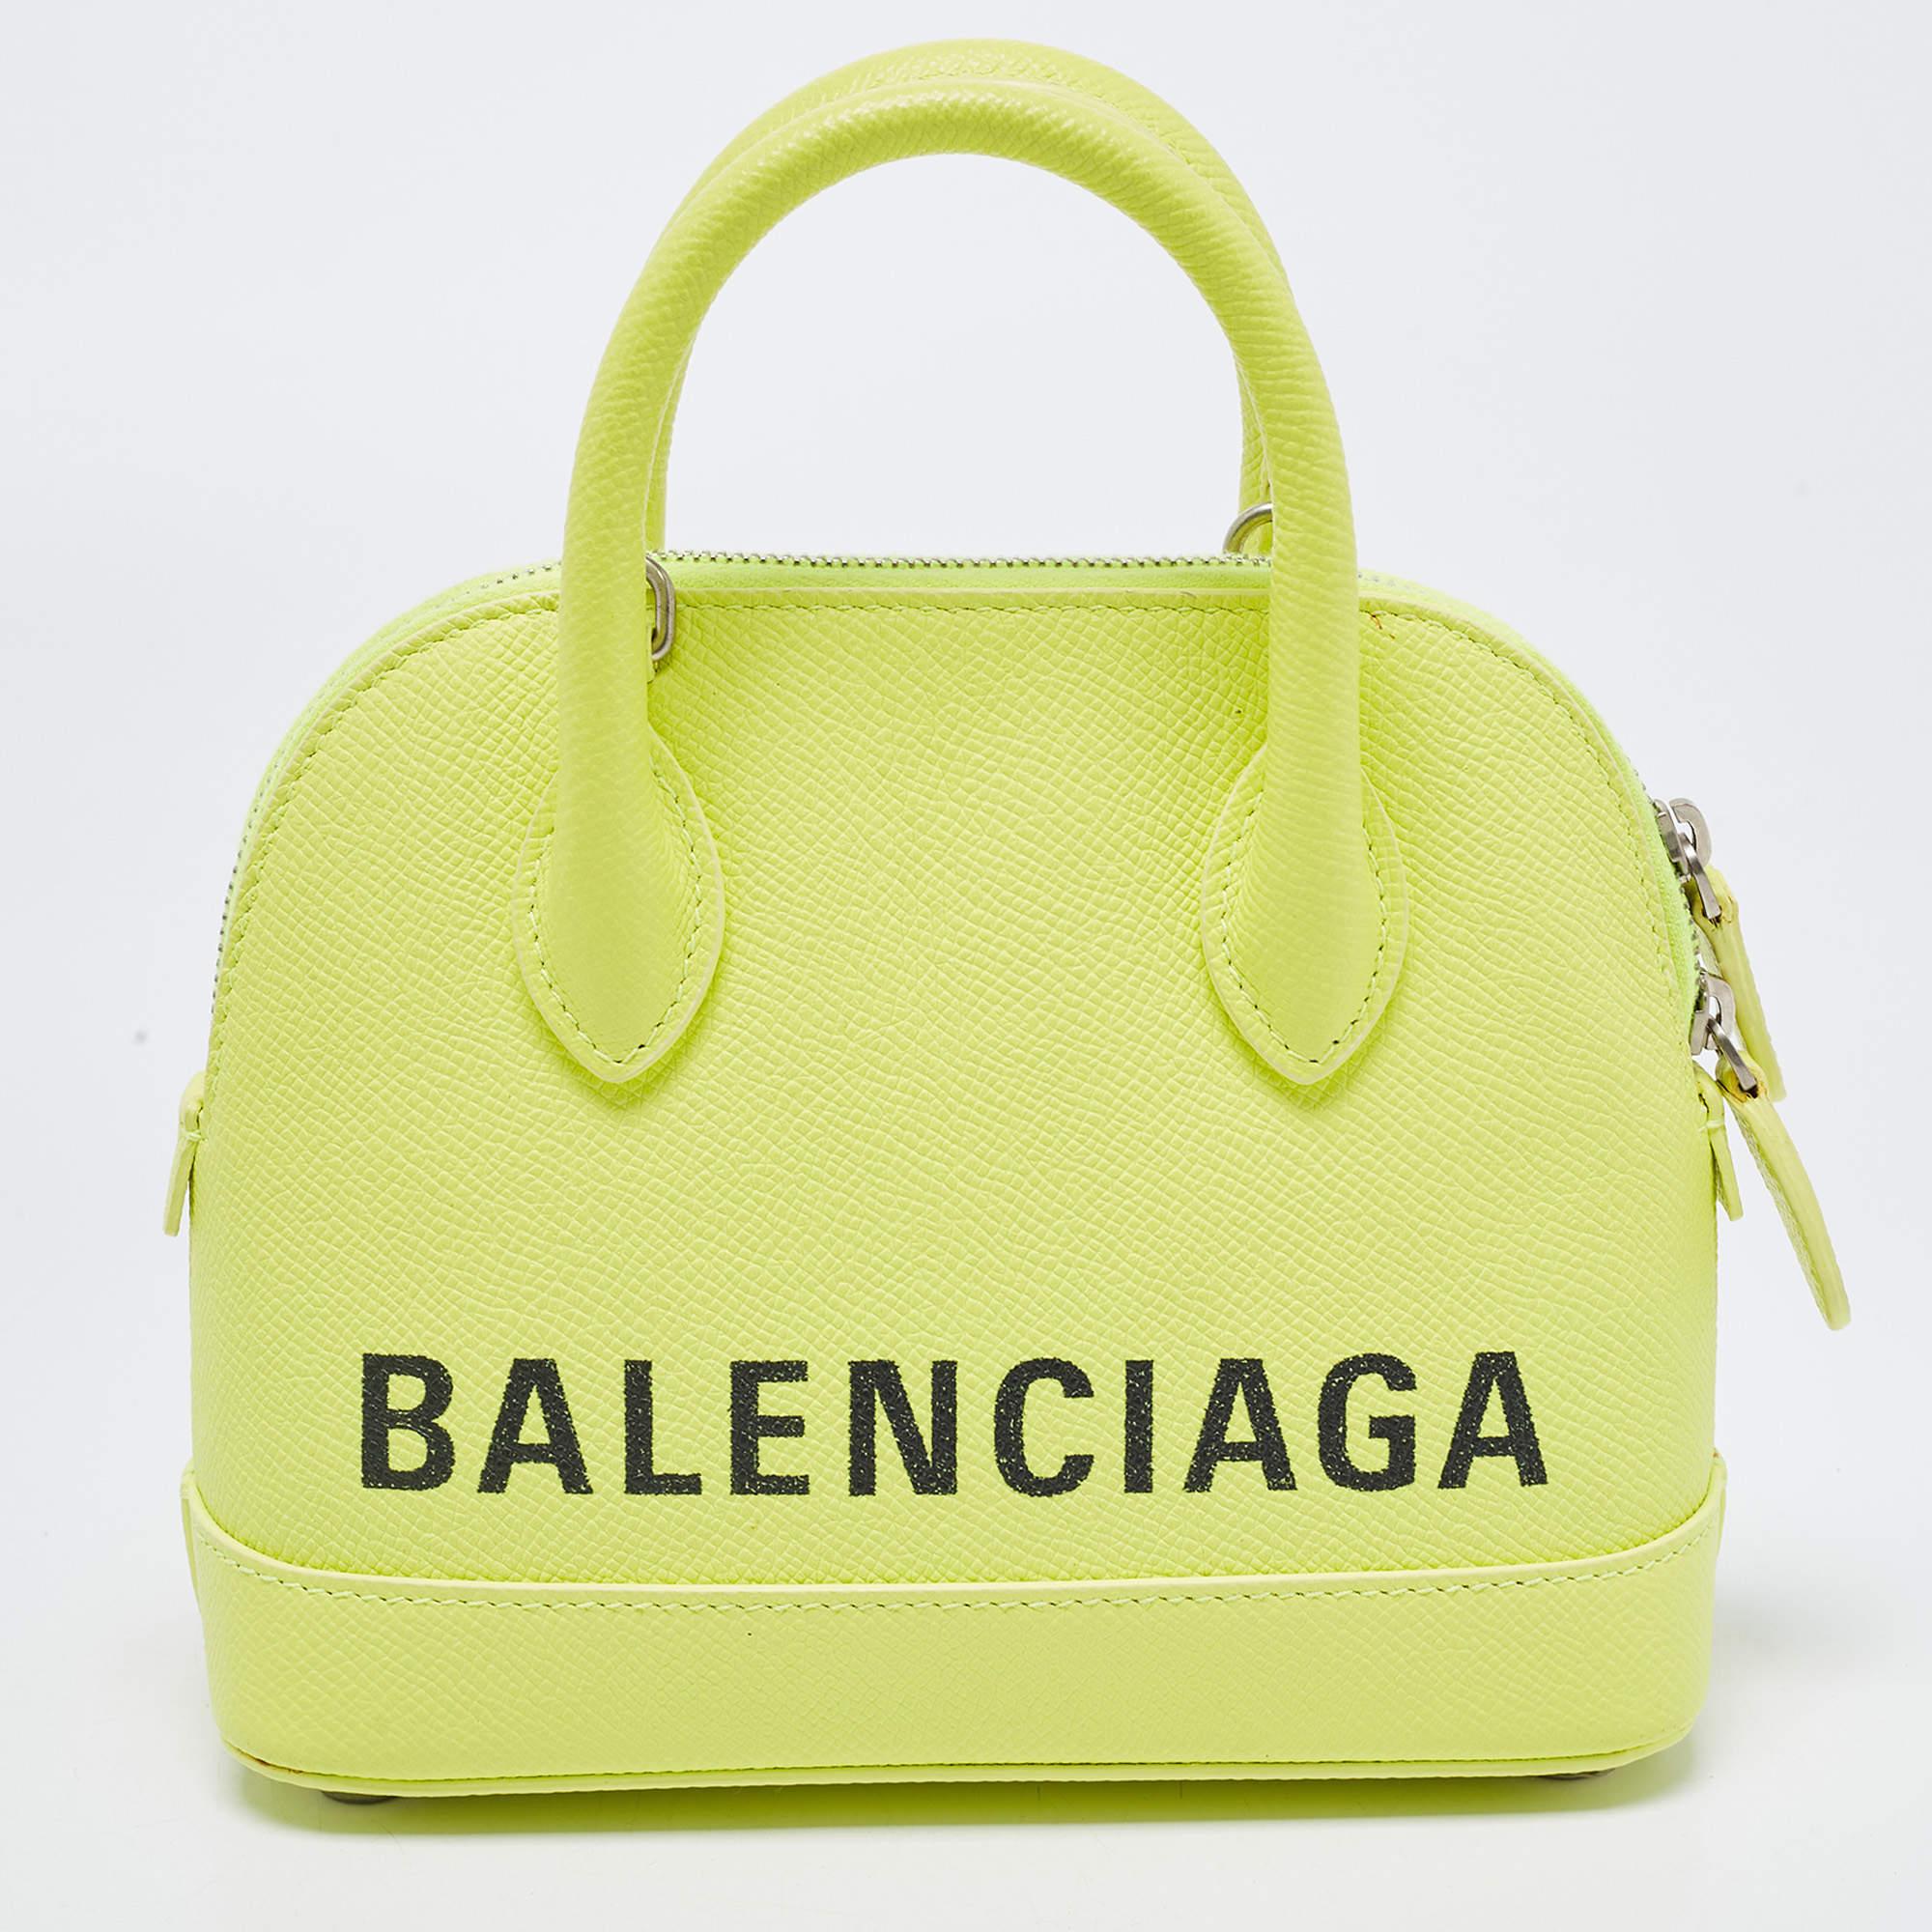 Defined by the signature on its exterior, Balenciaga's XXS Ville Logo satchel is an everyday showstopper. Shaped in a compact size, the silver-tone hardware and branding in black offer a luxurious contrast to the neon yellow leather. Secure the zip